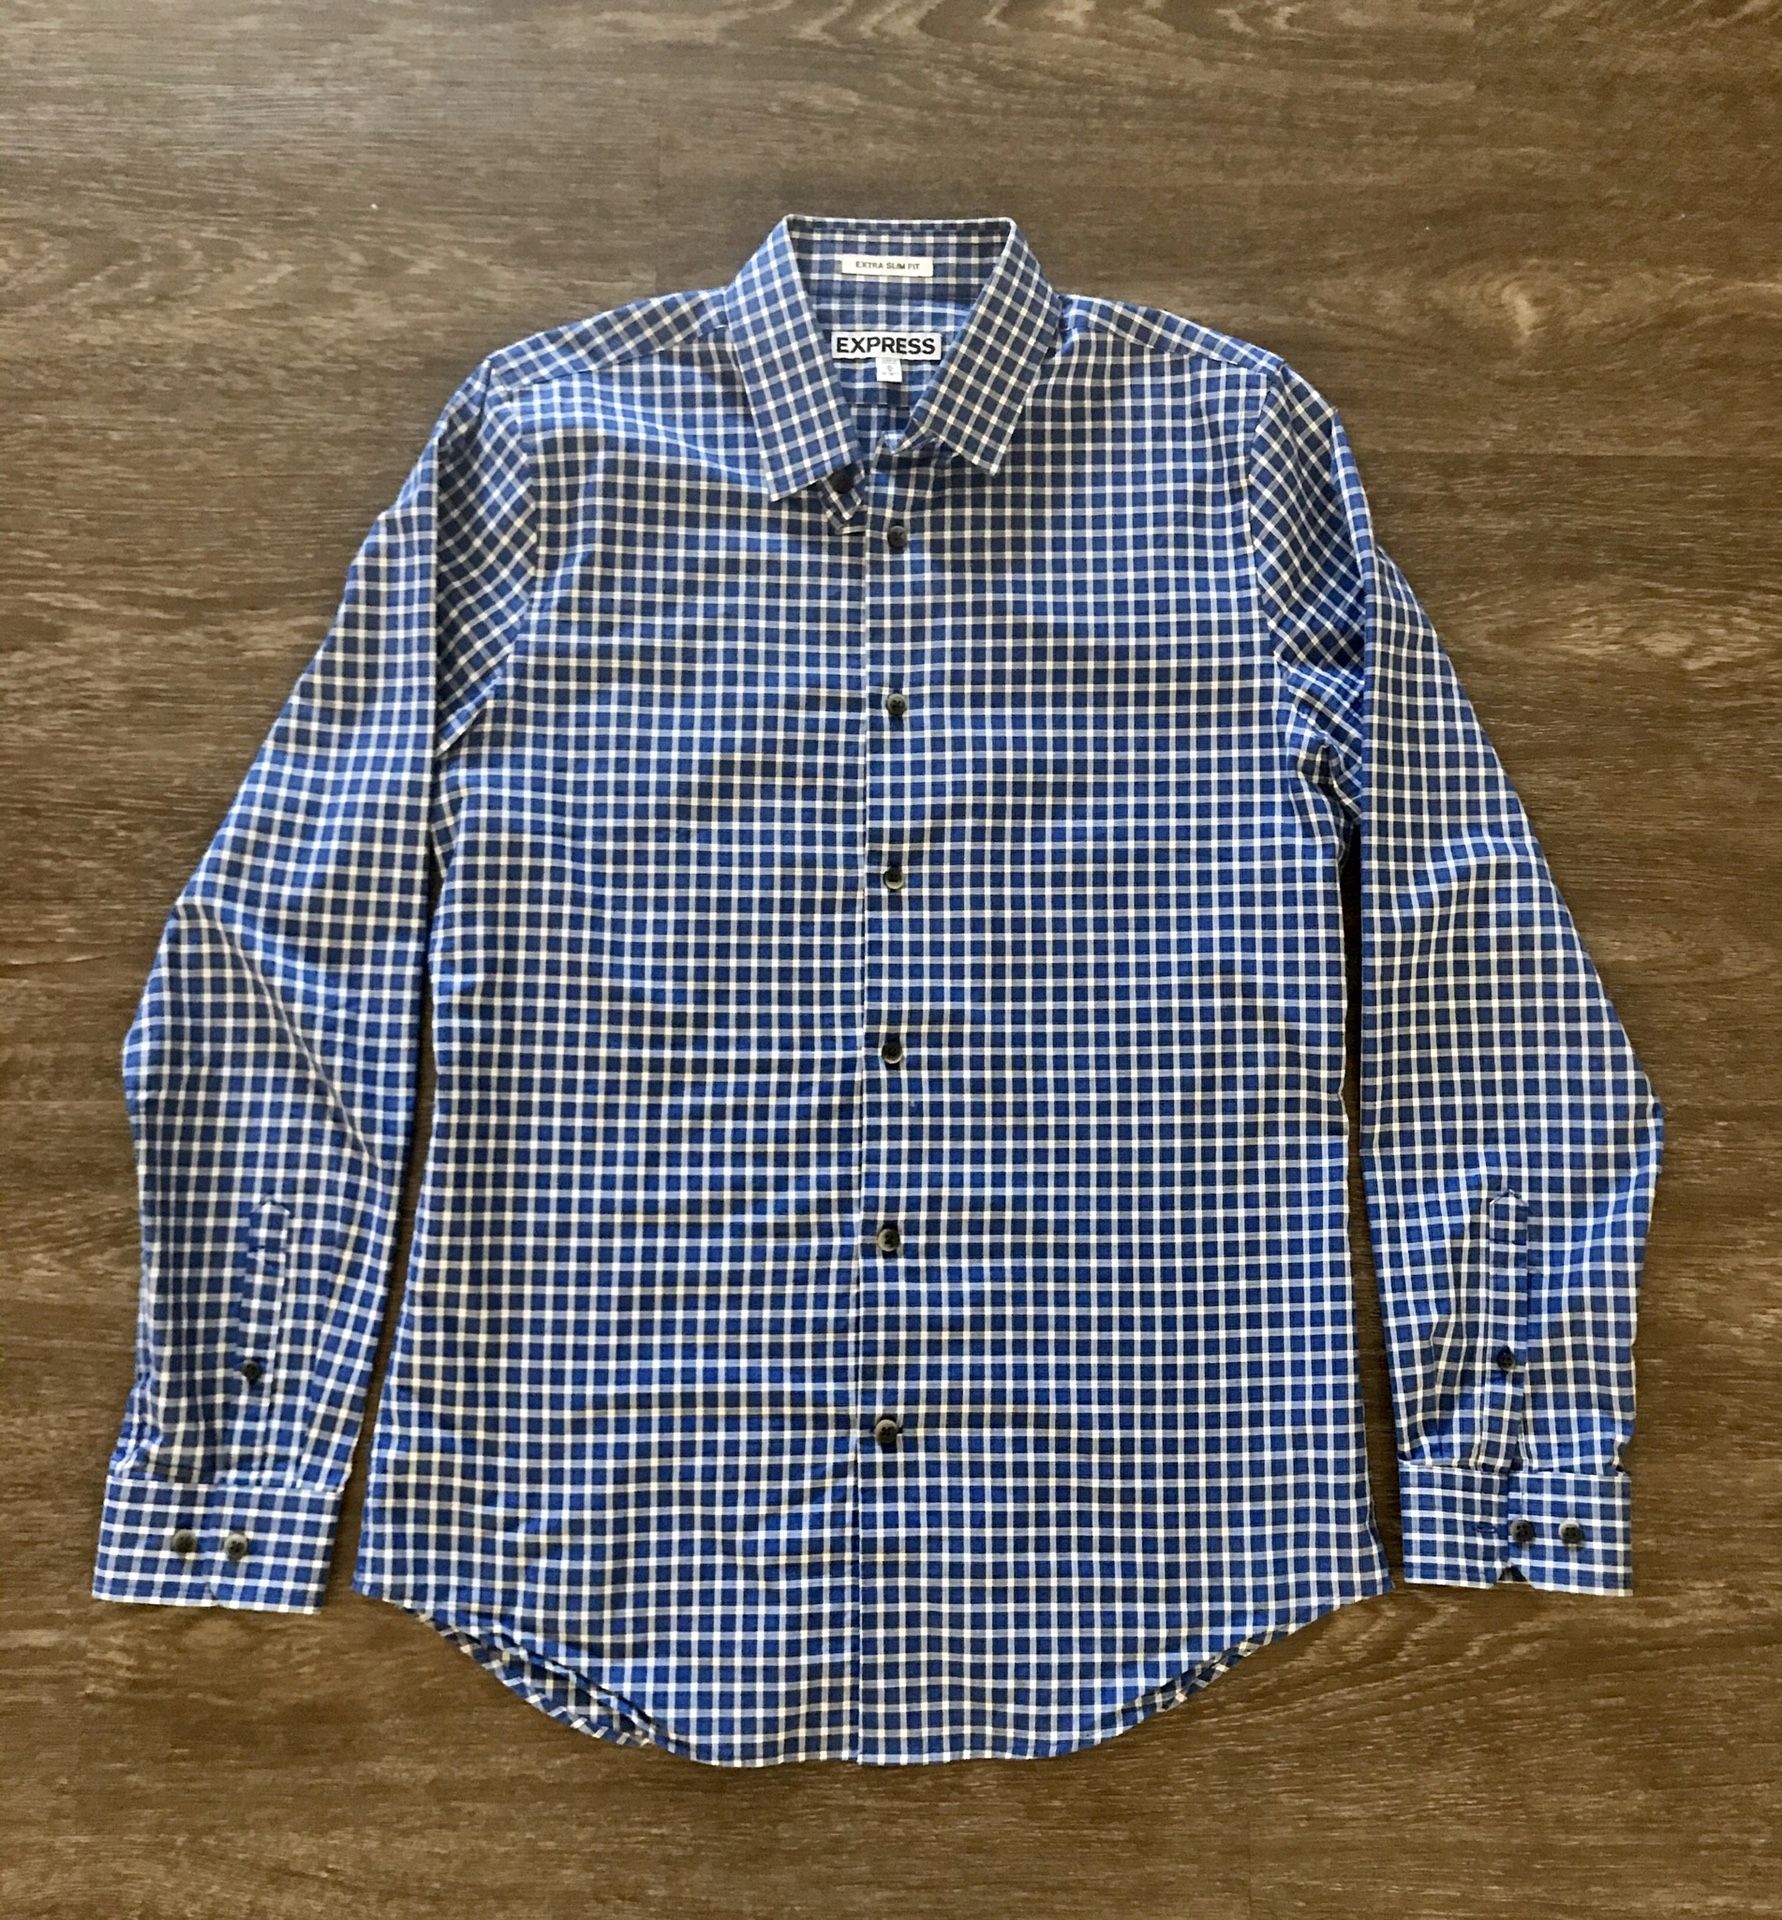 Express Brand Men’s Royal Blue and Black Plaid Long Sleeved Buttoned Down Shirt